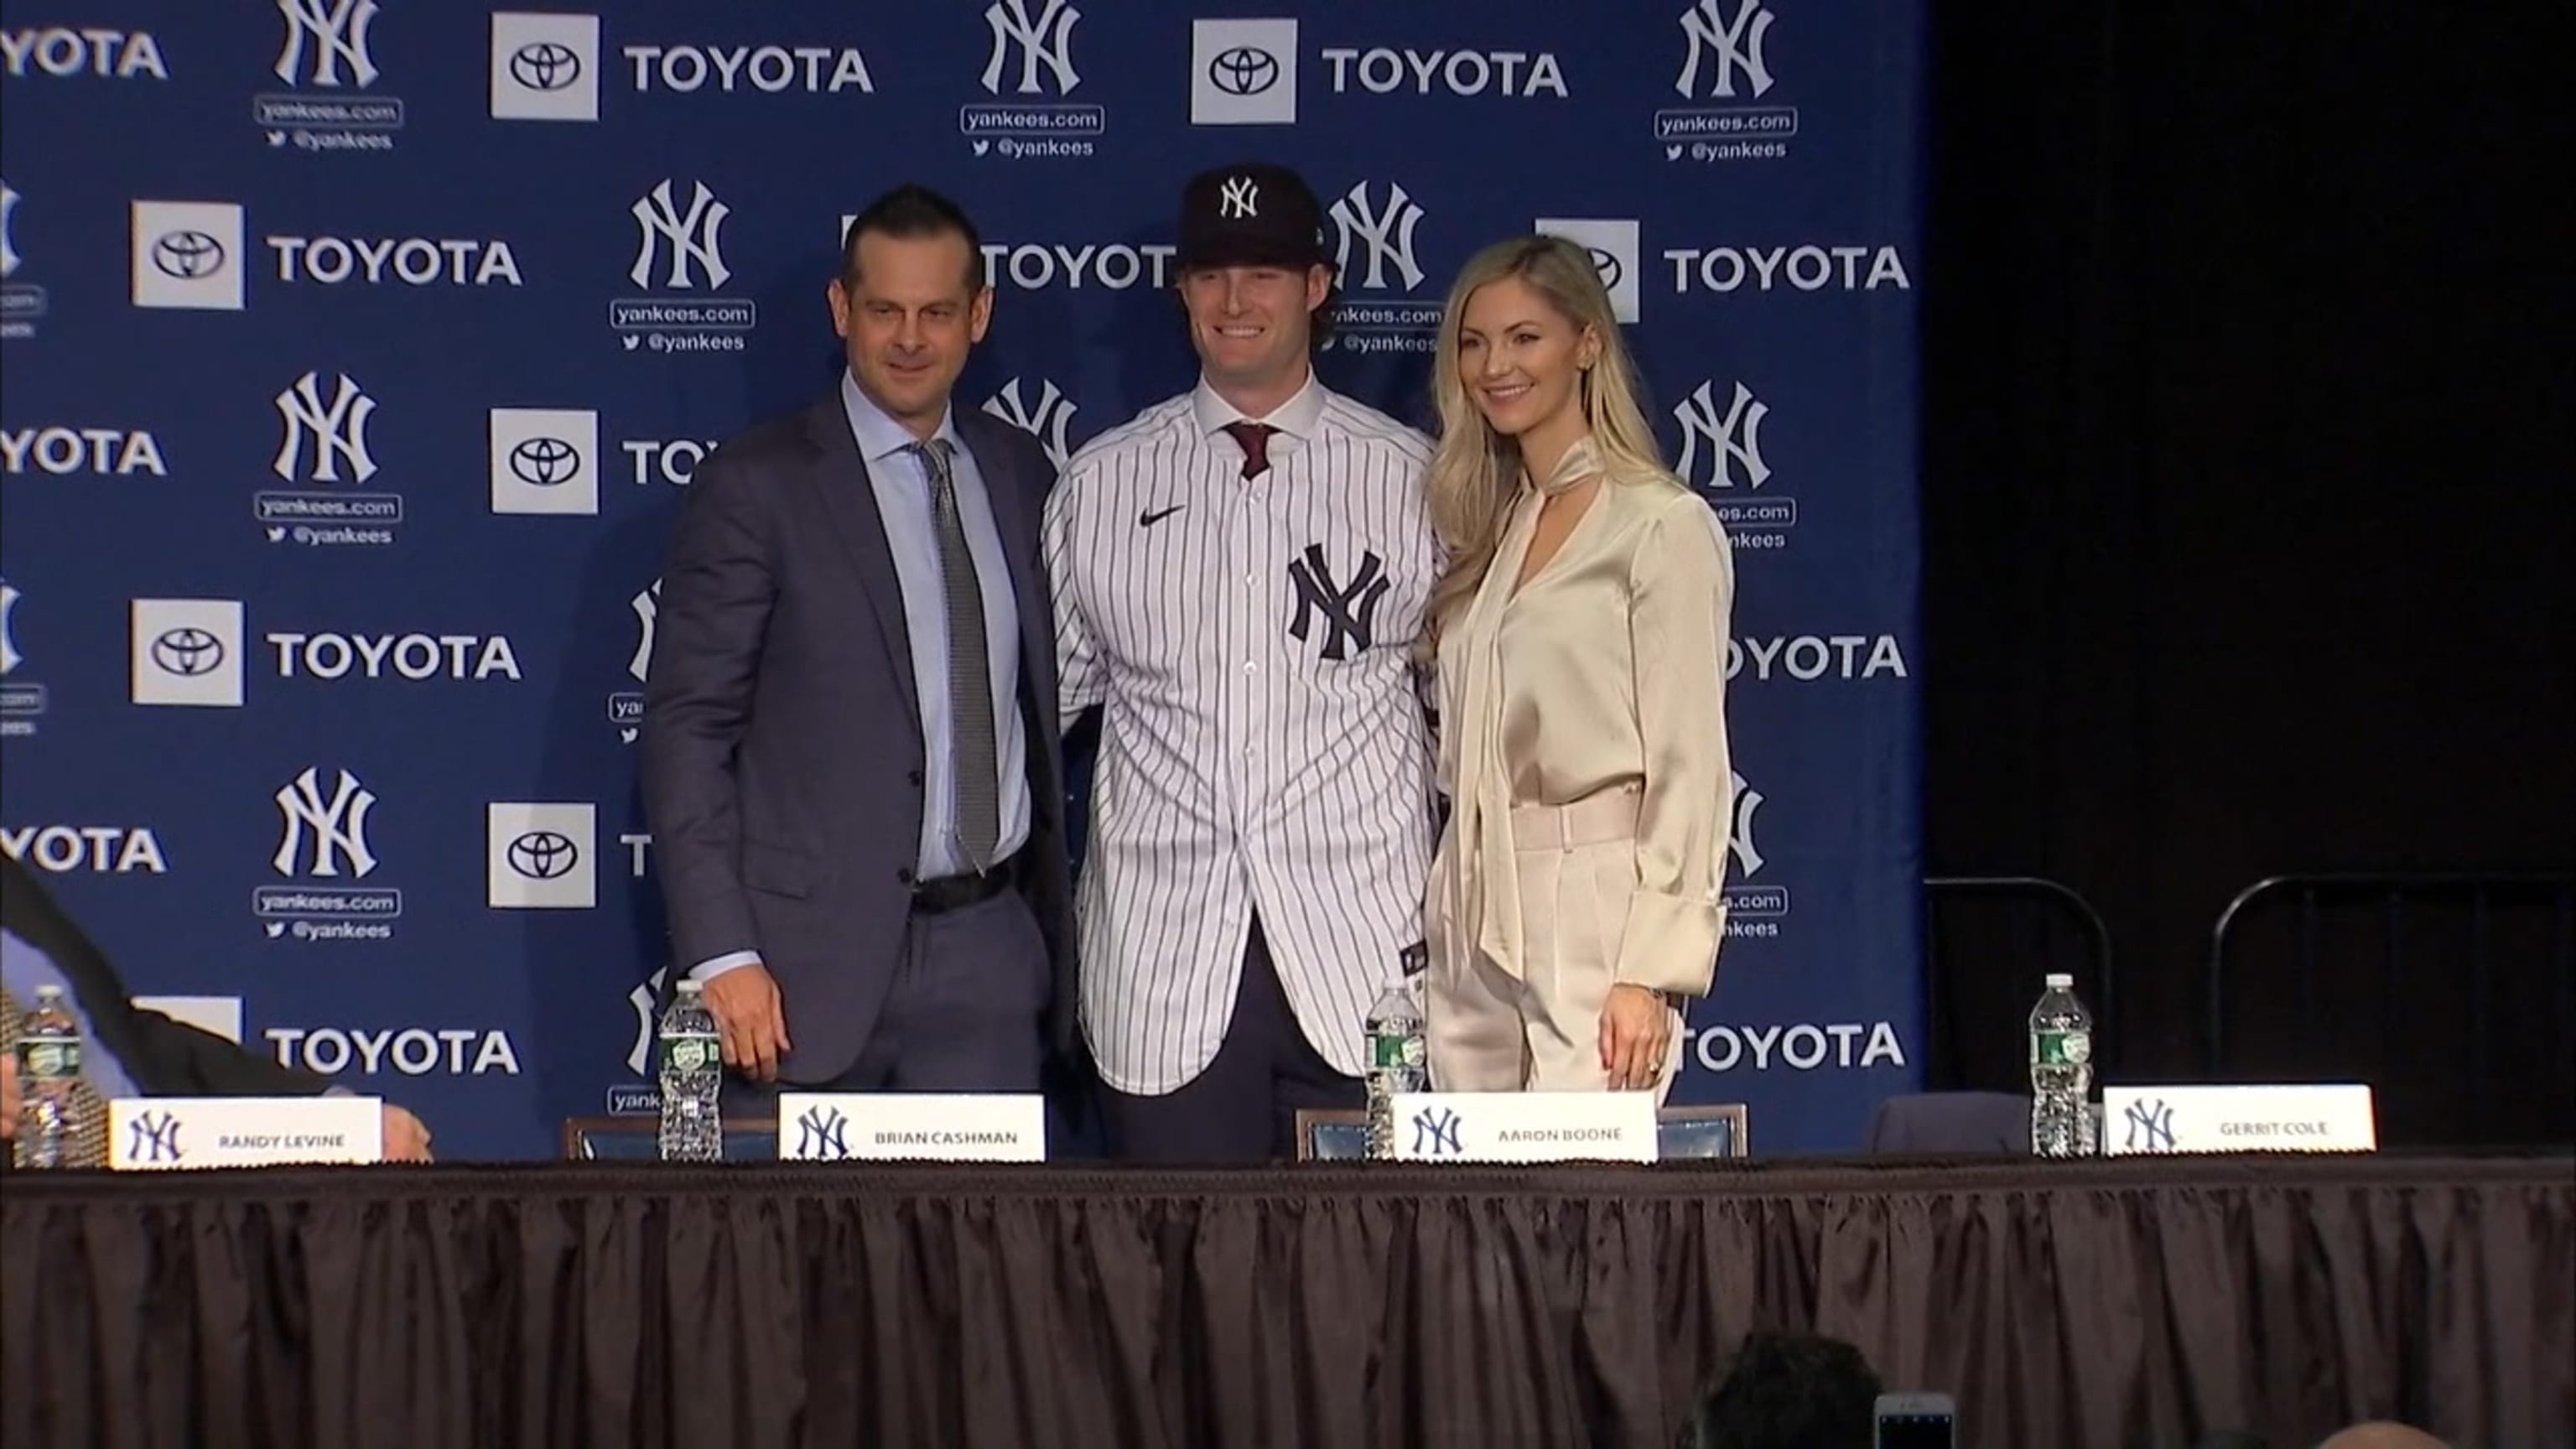 Gerrit Cole trolled on social media for bringing sign to Yankees press  conference